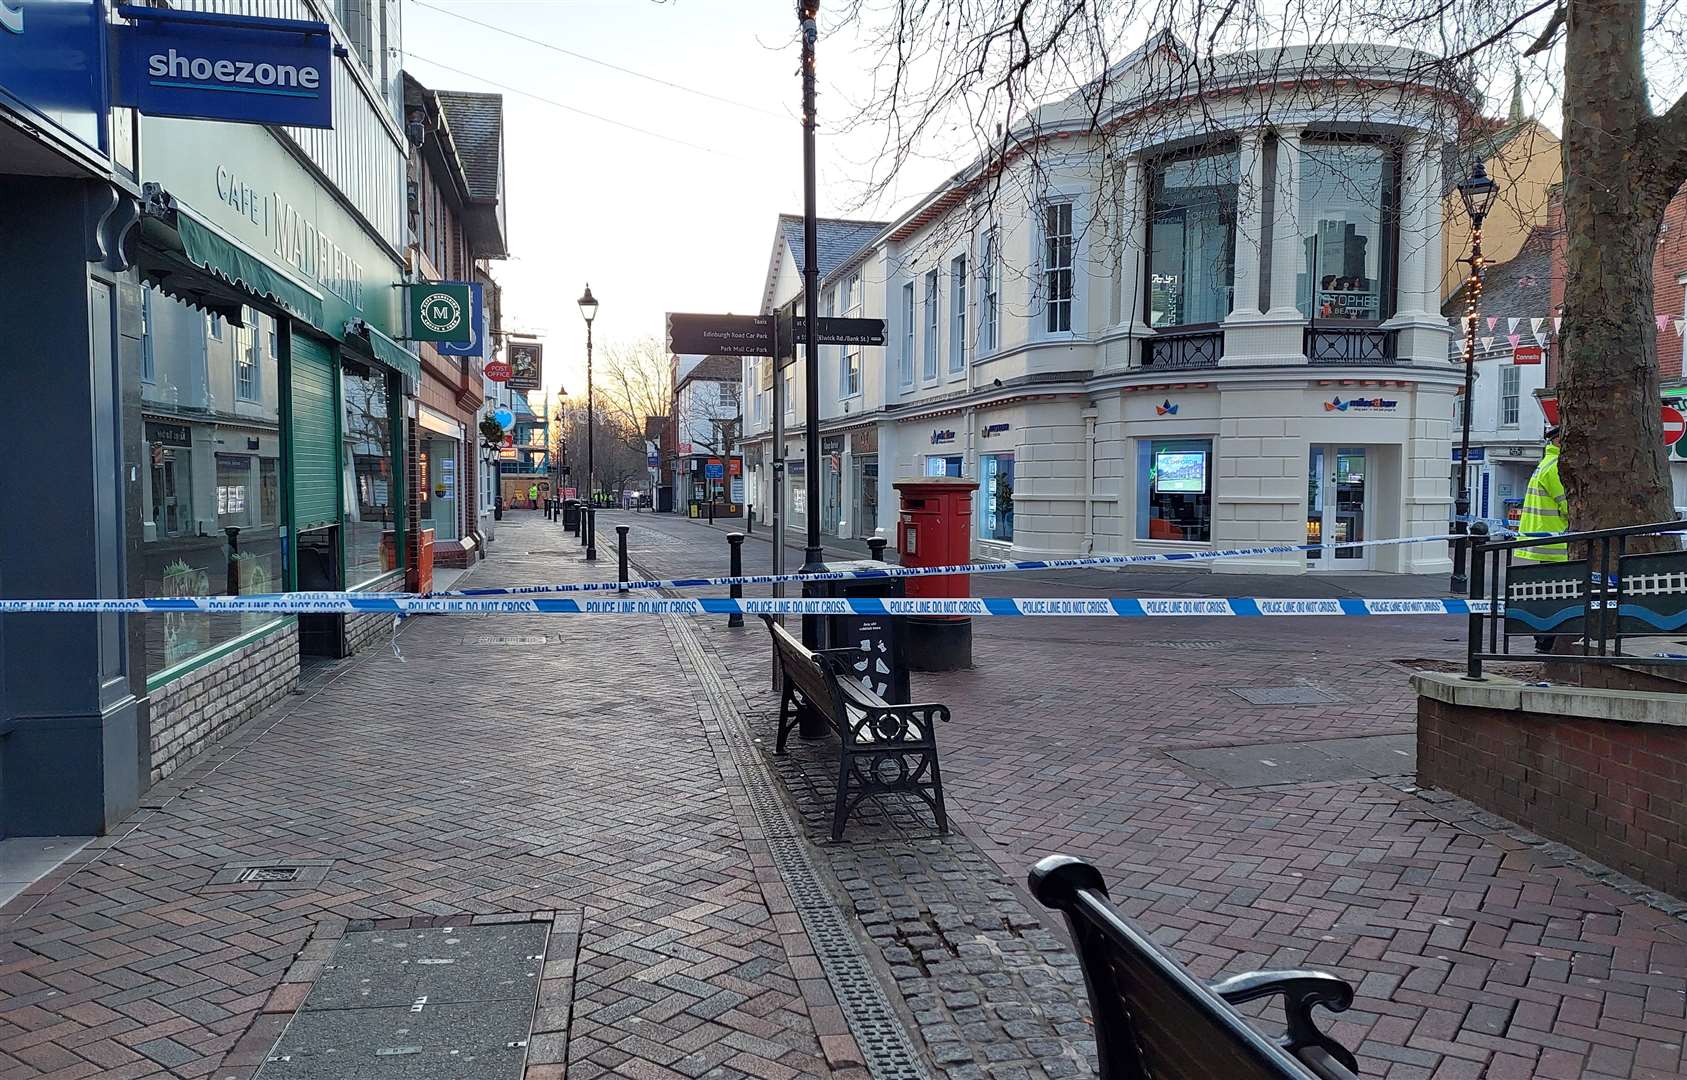 Ashford town centre was taped off all day as police investigated the scene